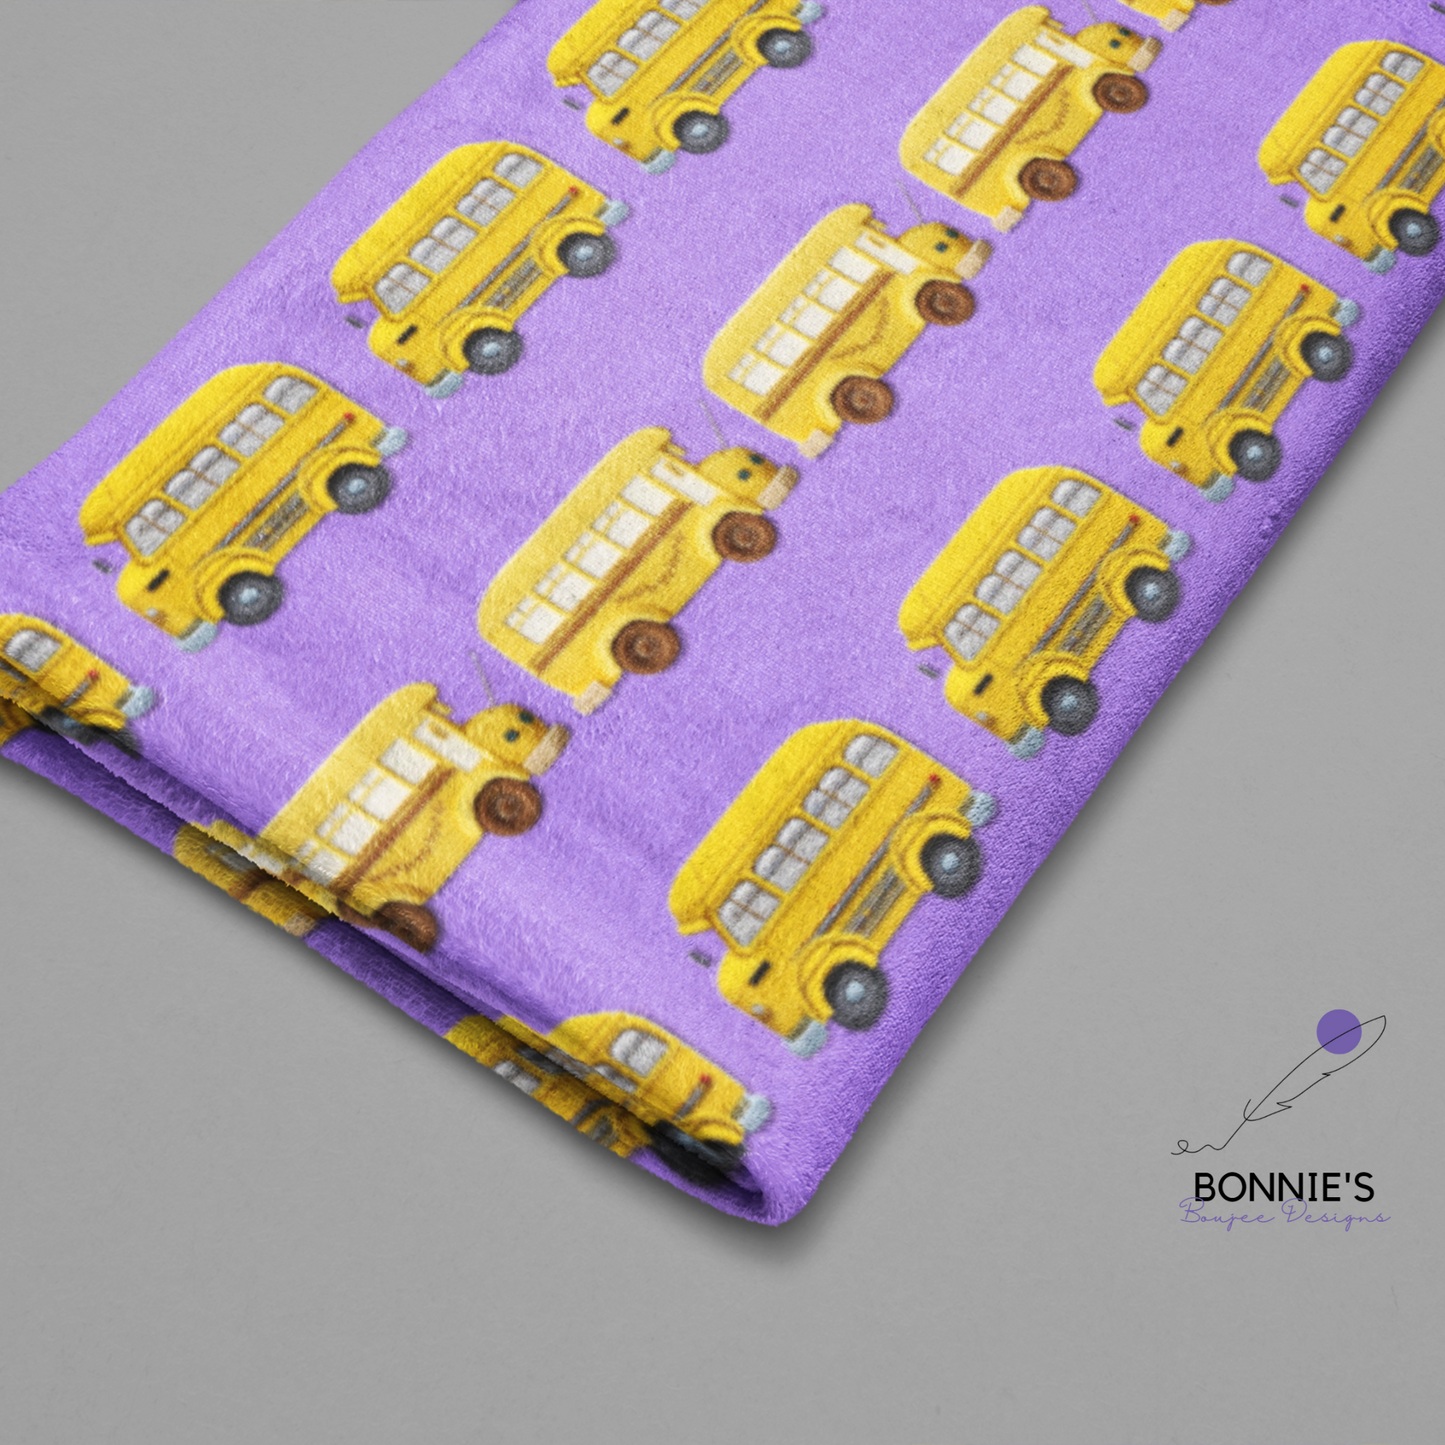 Embroidery School Busses on Purple Seamless File